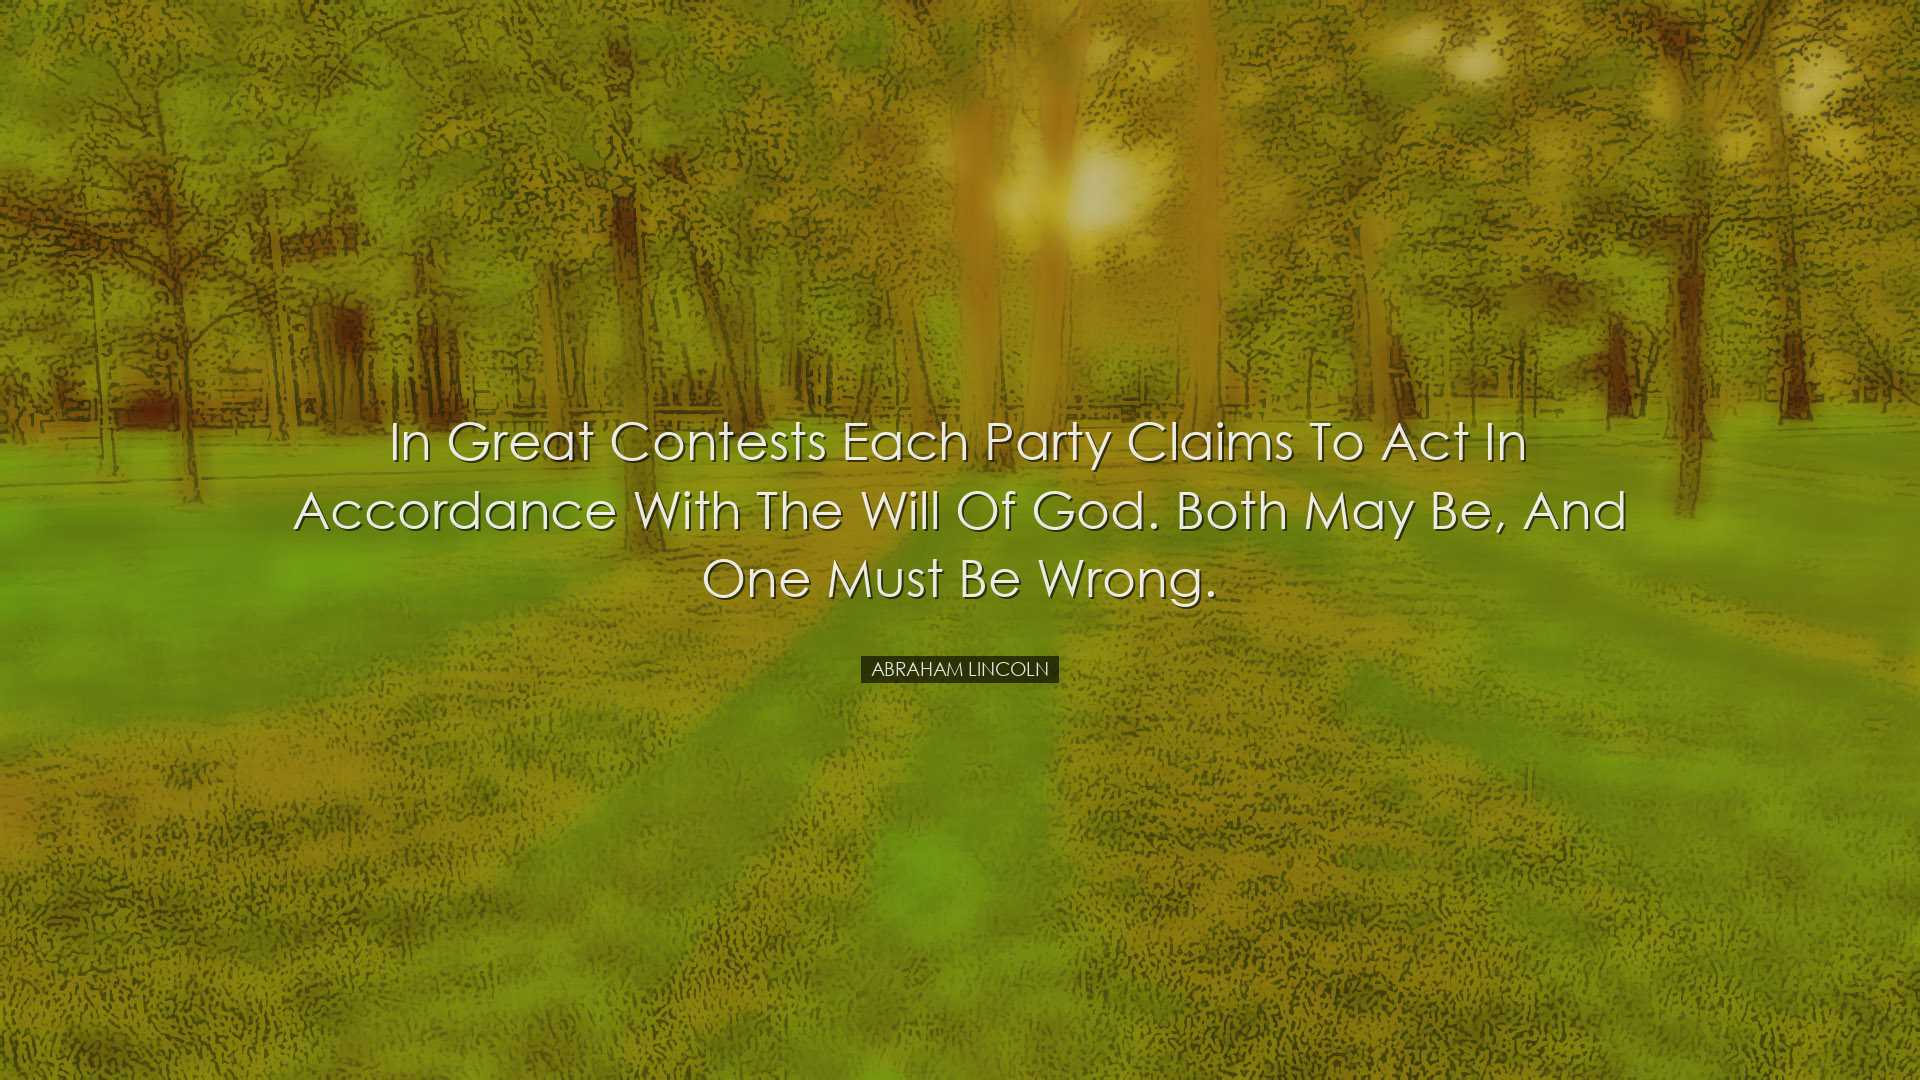 In great contests each party claims to act in accordance with the